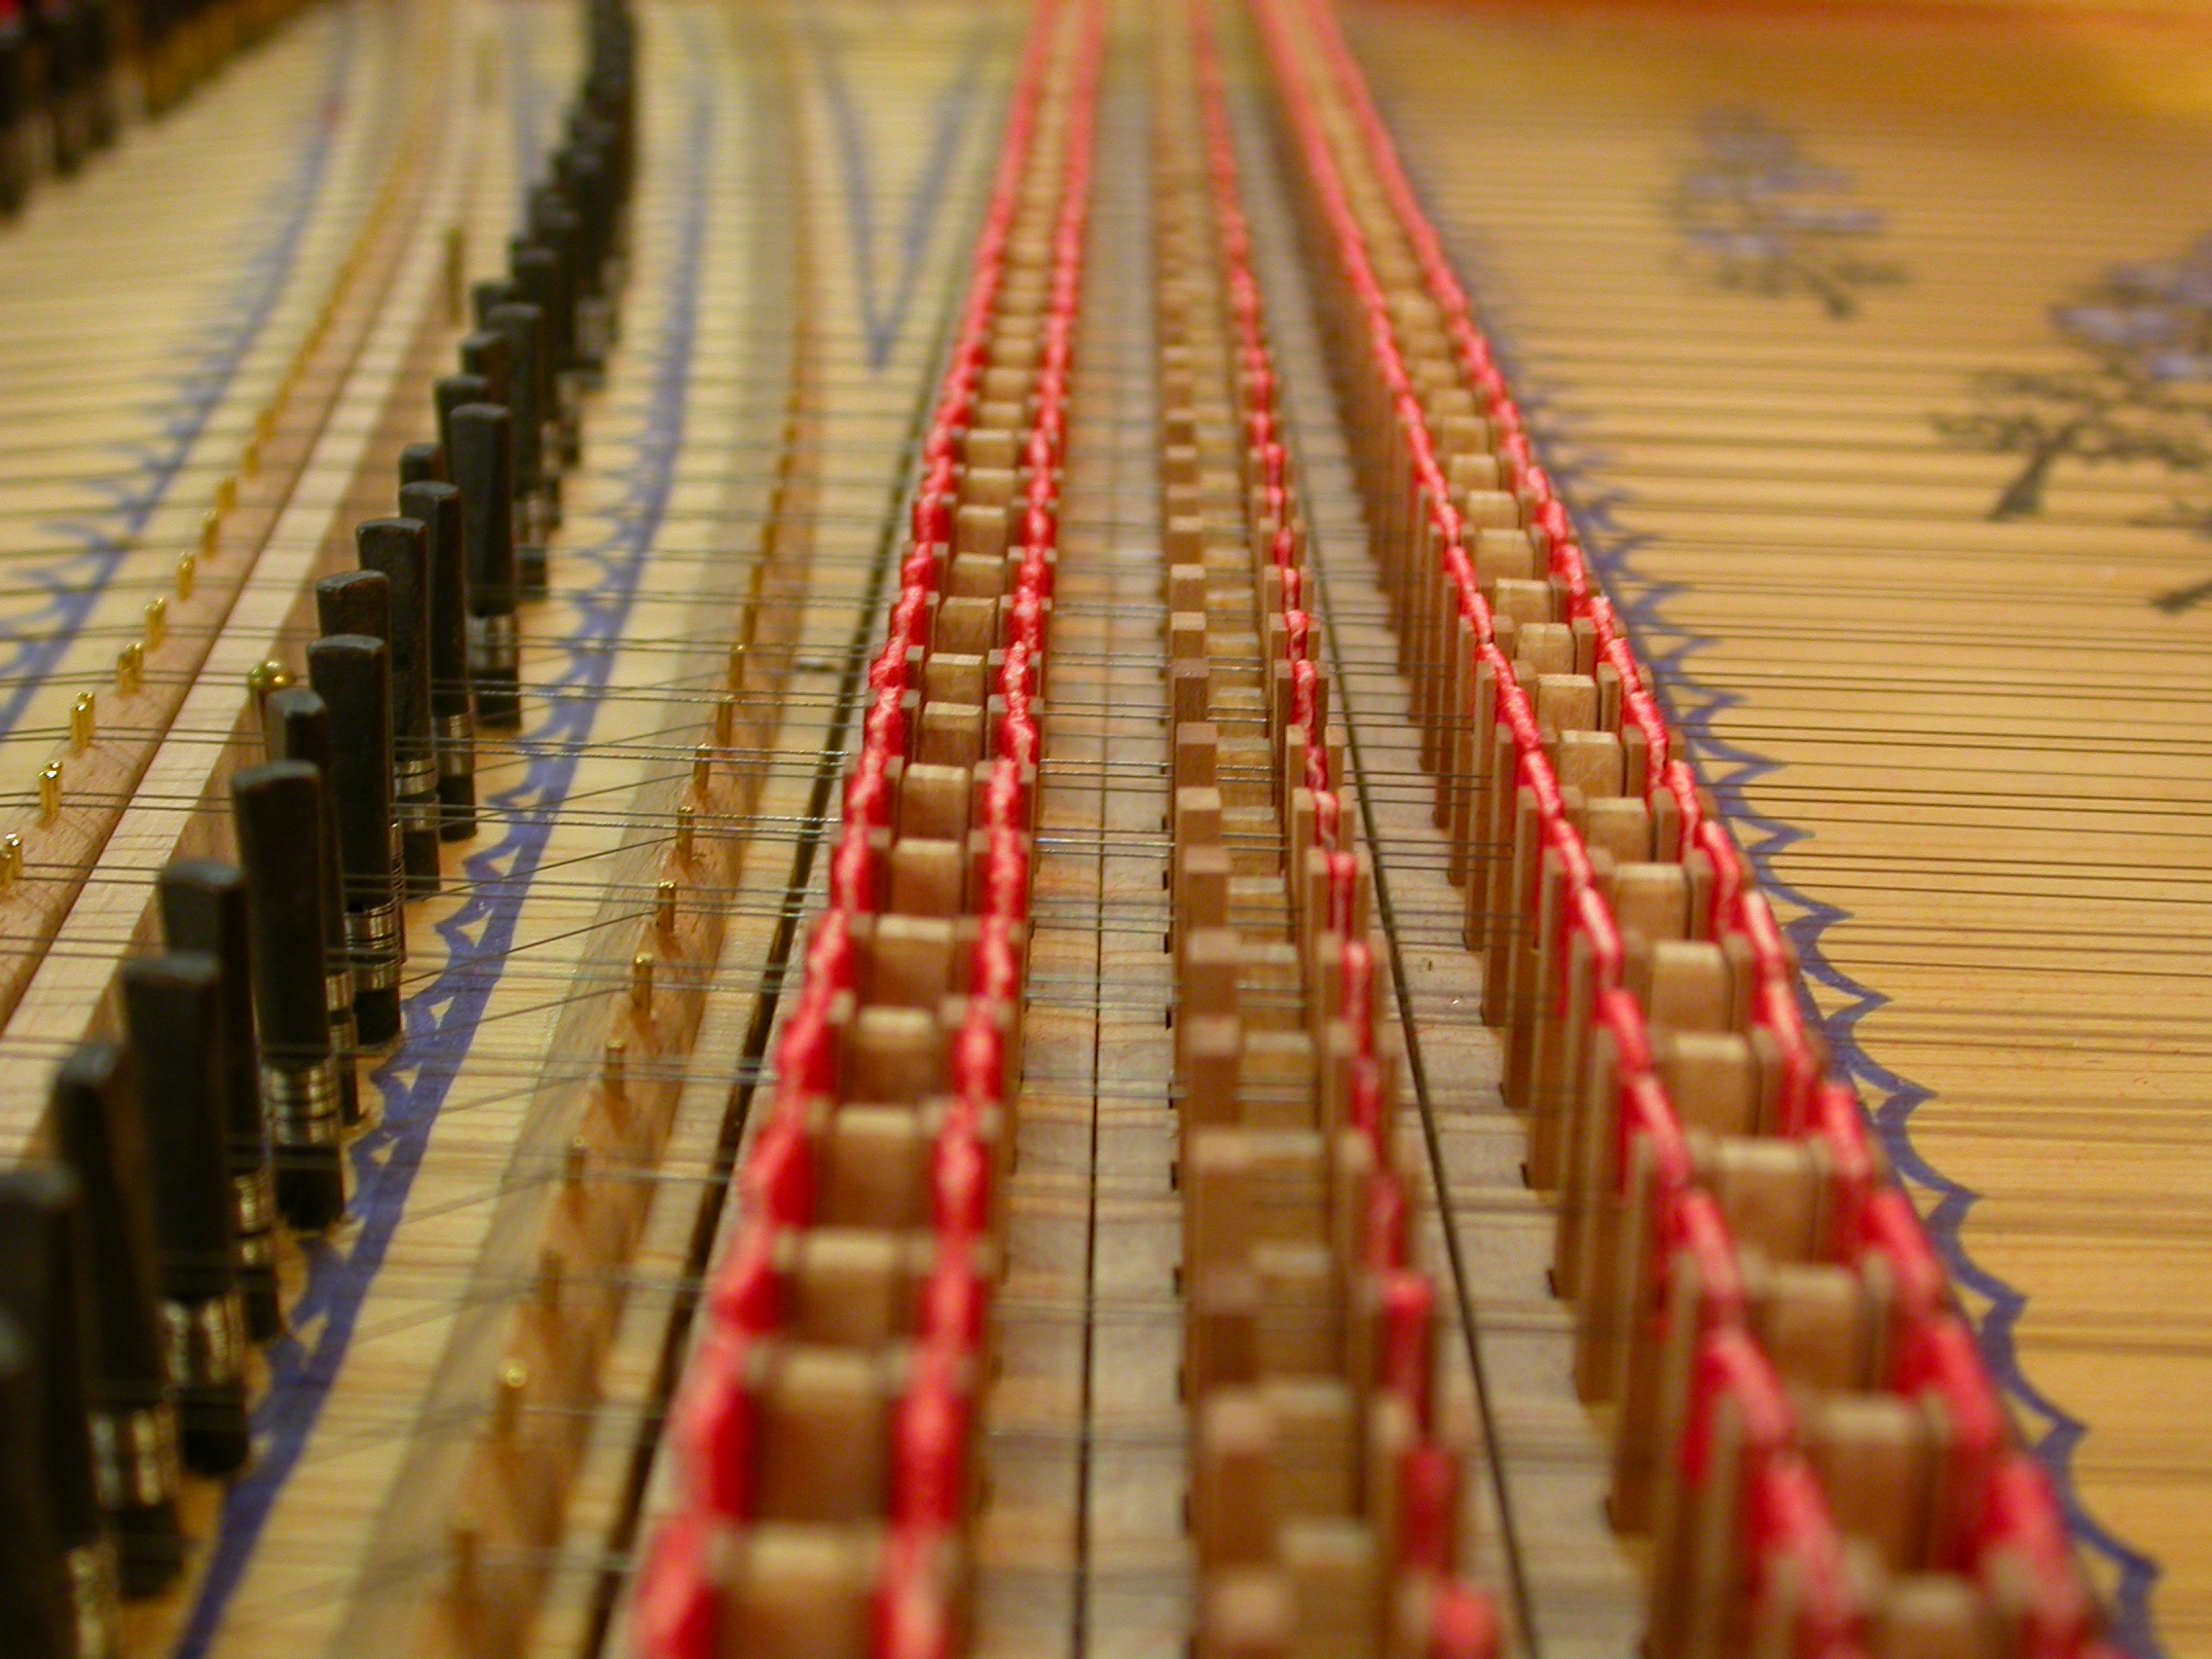 paul inside of piano strings instrument